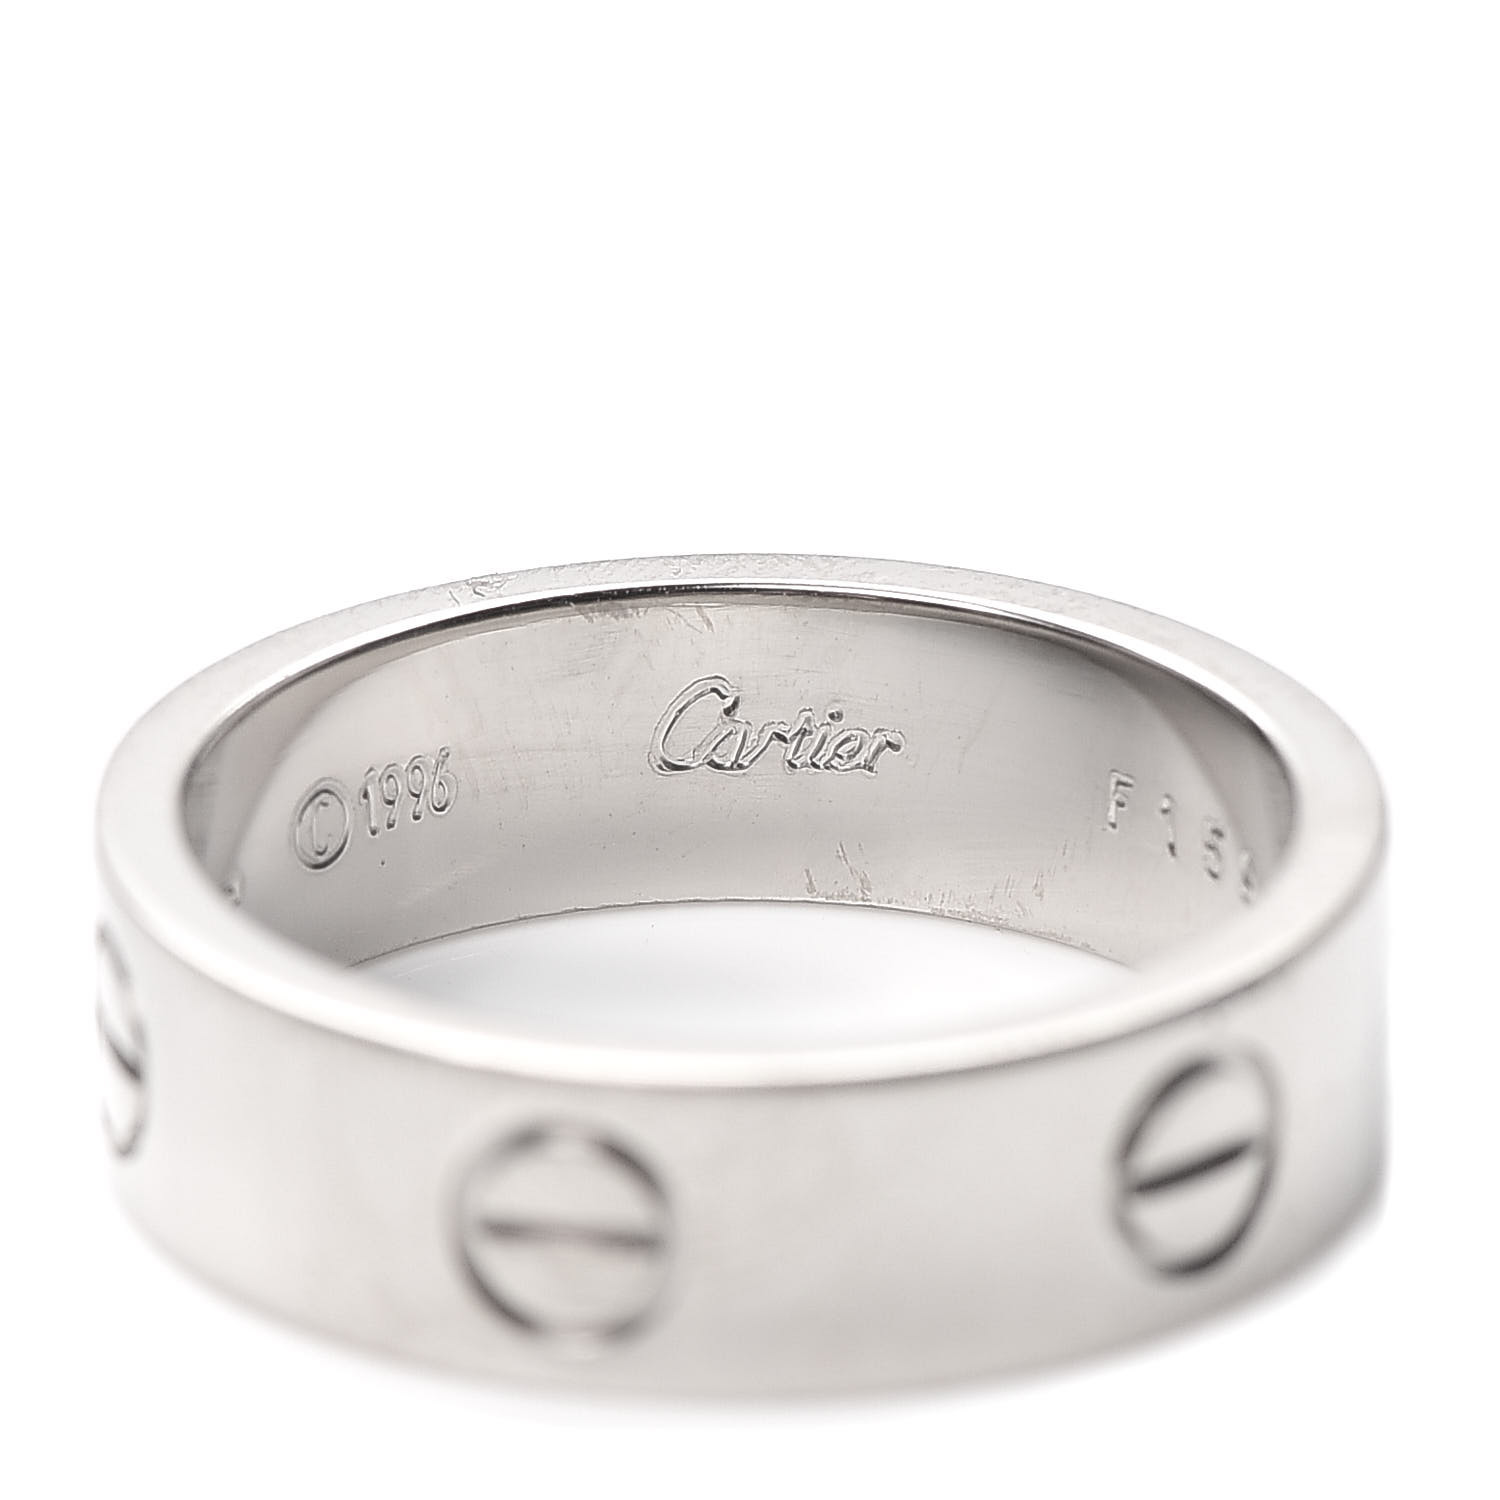 CARTIER 18K White Gold 5.5mm LOVE Ring 58 8.5 751841 | FASHIONPHILE